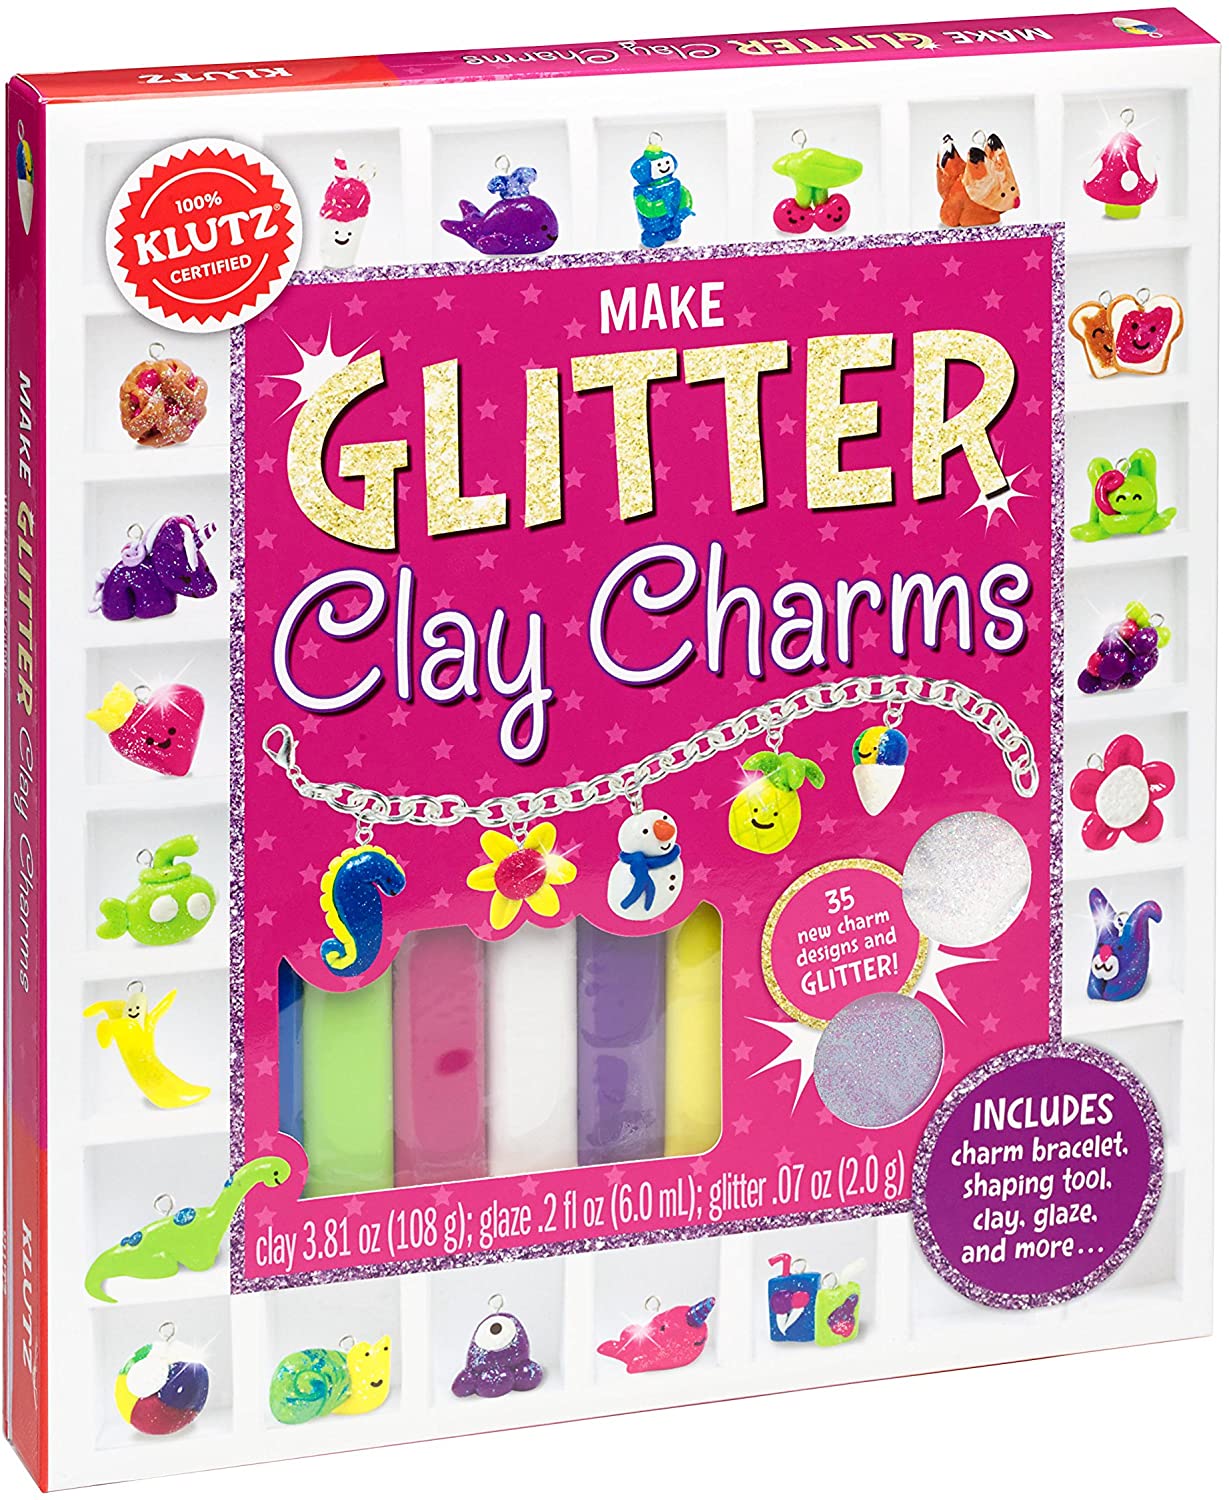 Klutz Make Glitter Clay Charms Craft Kit $11.89 at Amazon